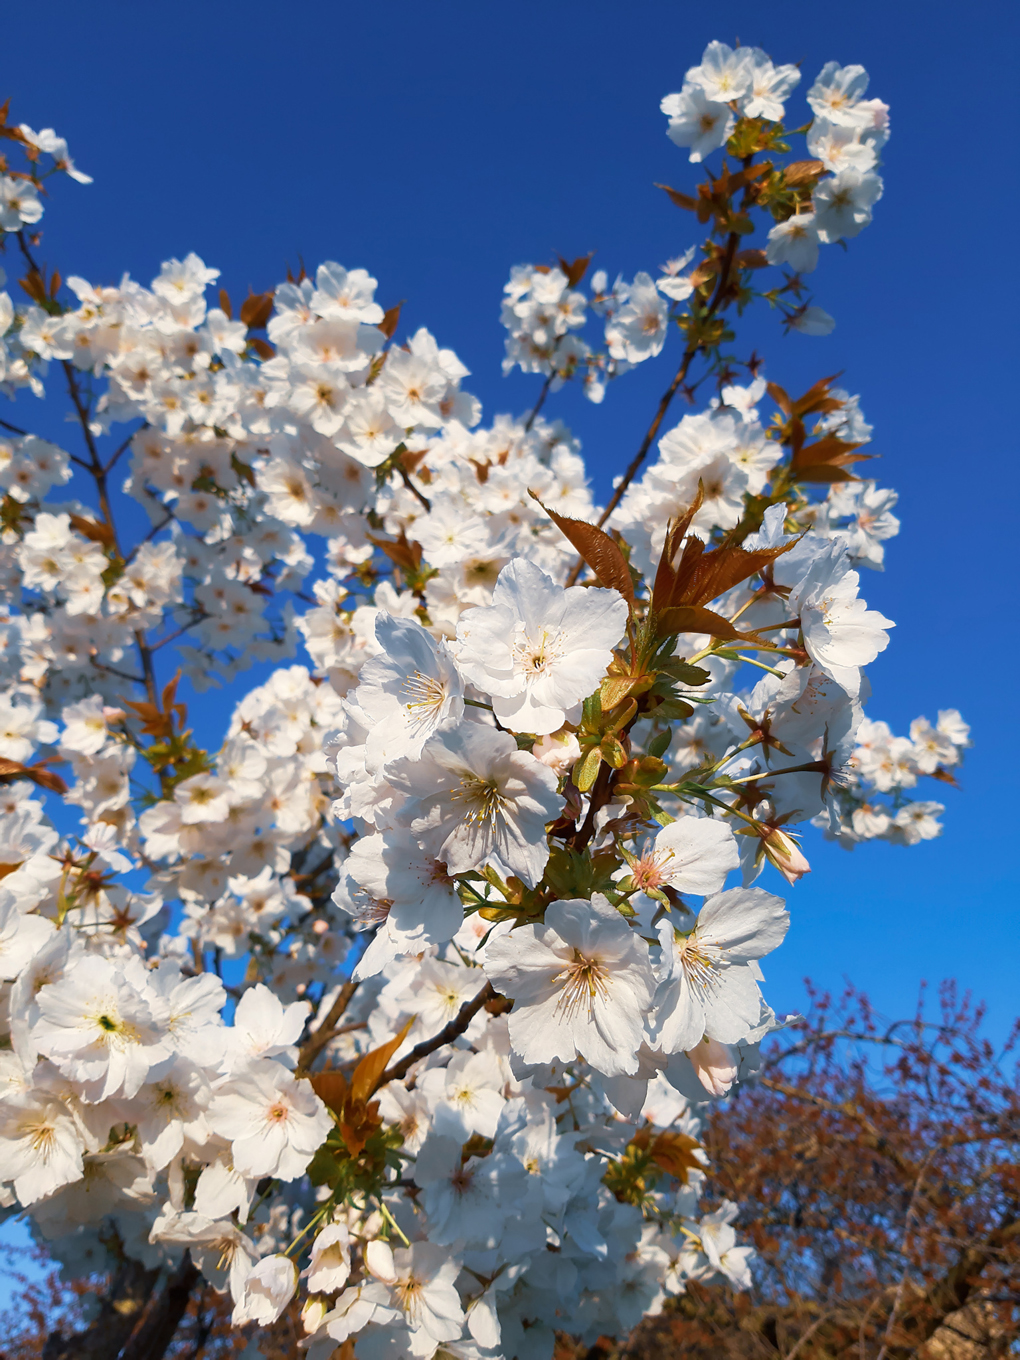 Clusters of white flowers against a clear blue sky